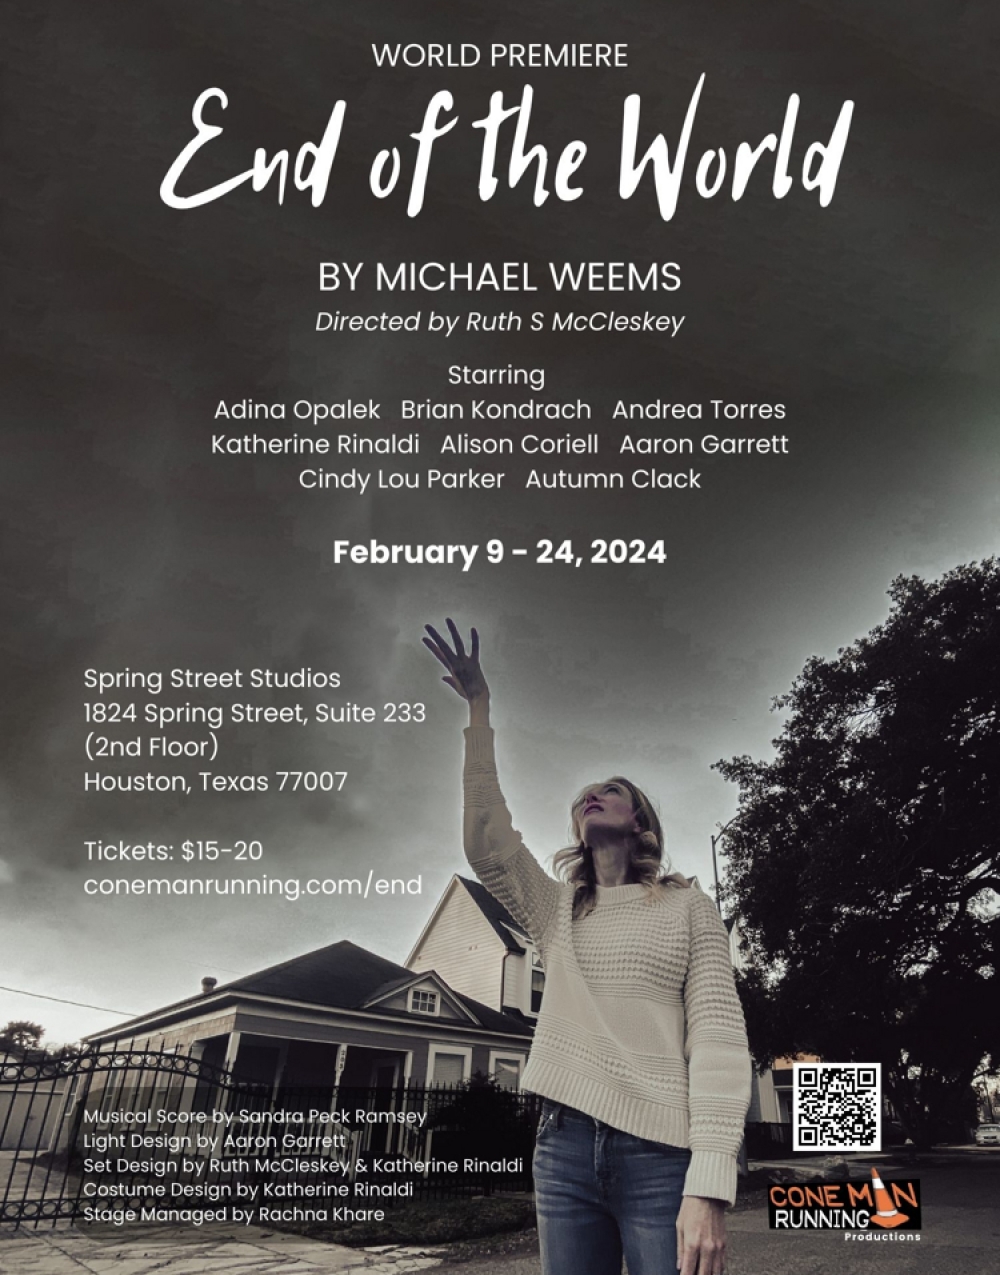 World Premiere​ of End of the World by Michael Weems - Cone Man Running Productions Stage Mag